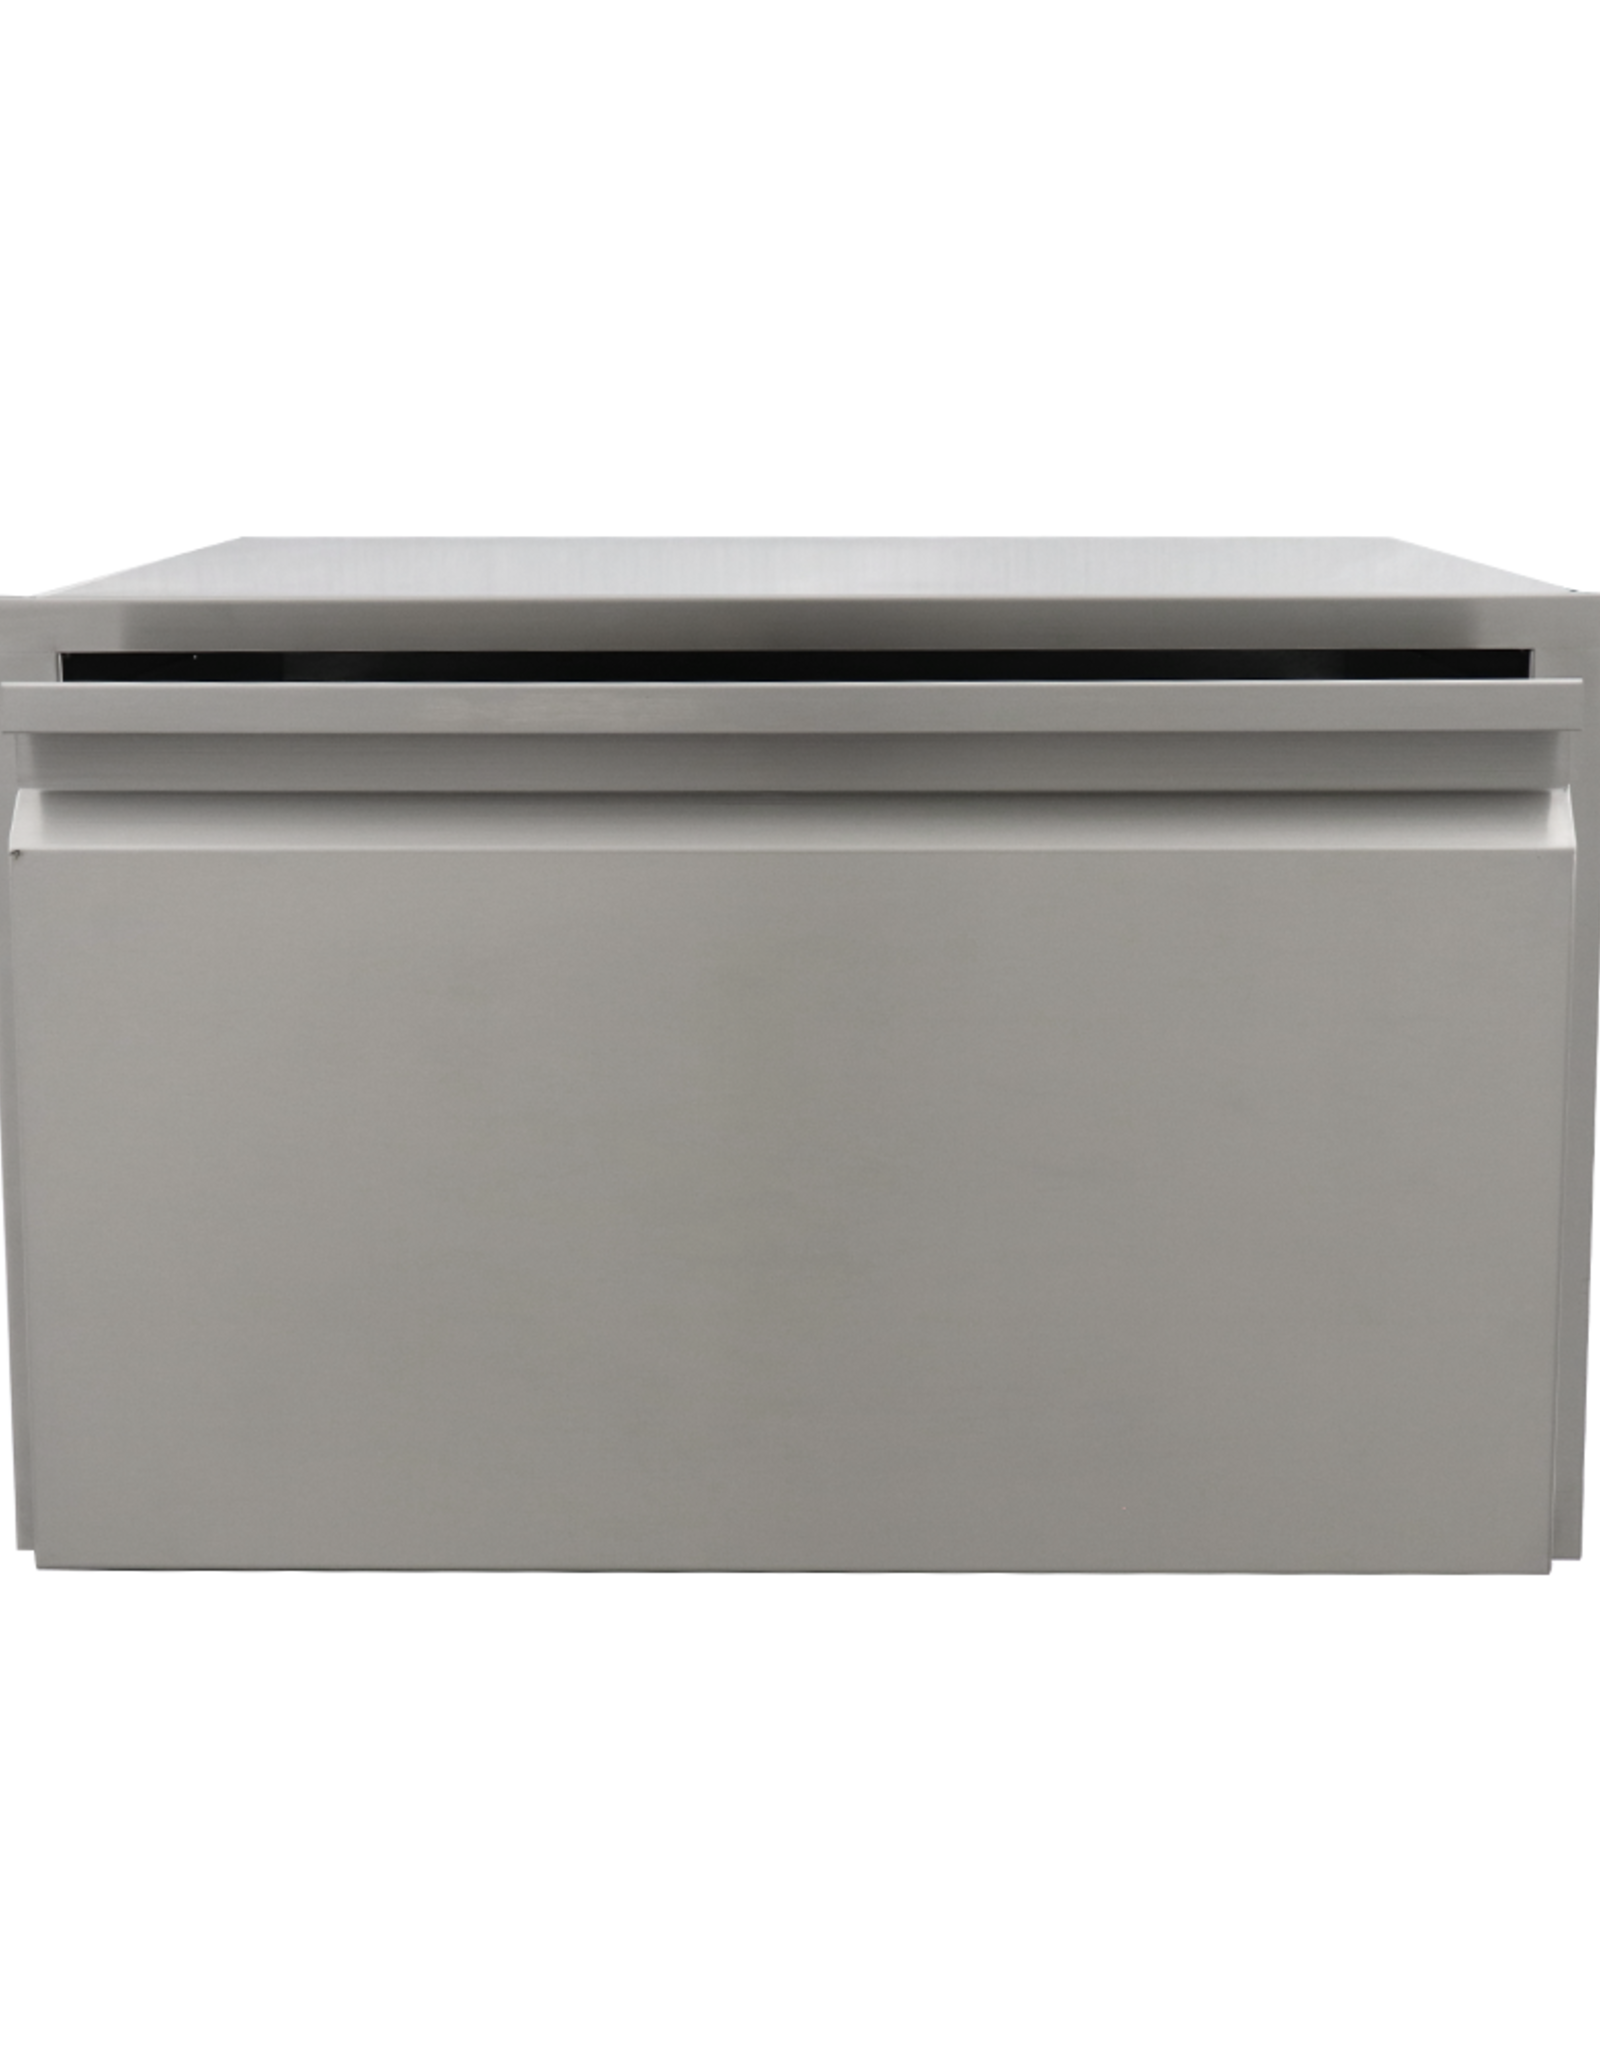 Renaissance Cooking Systems Renaissance Cooking Systems The Valiant Series Kamado Storage Drawer / Shelf - VLSD1